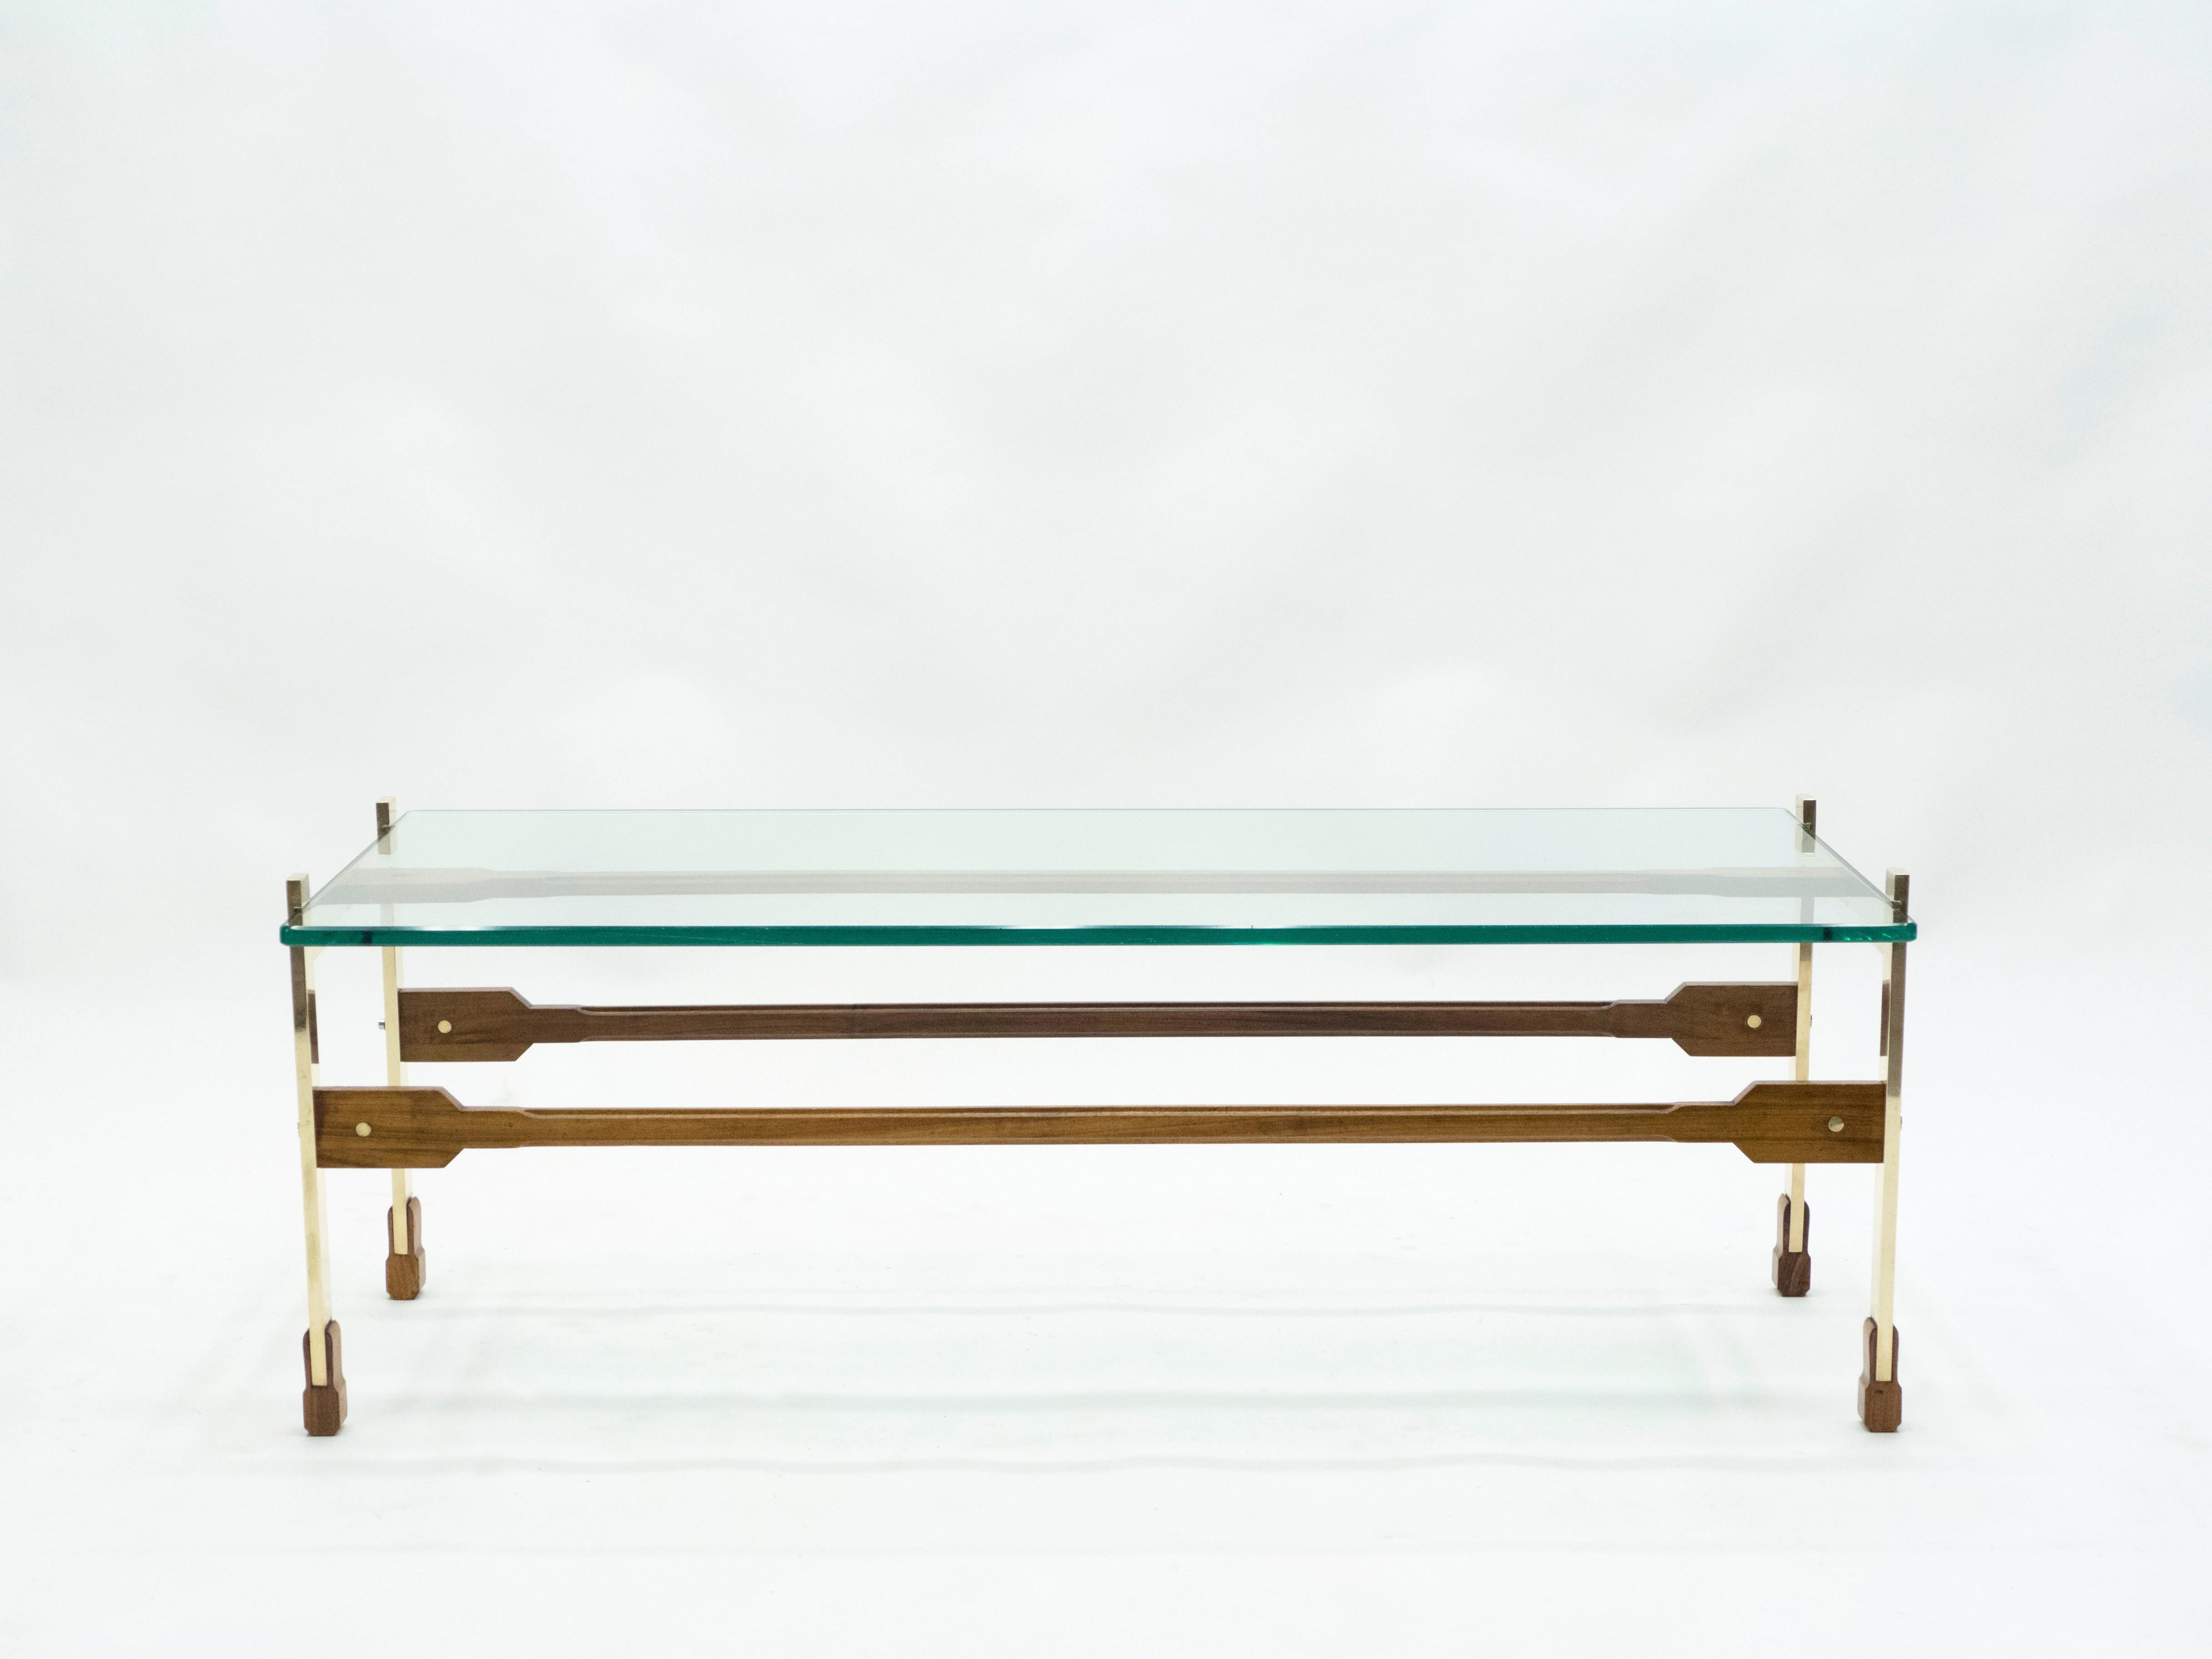 This table made by Santambrogio & De Berti, with its polished brass base and feet, and three rosewood sleepers, reflects all the beauty and finesse of Italian Mid-Century Modern design. It is stunning in either modern or Classic interior, and a